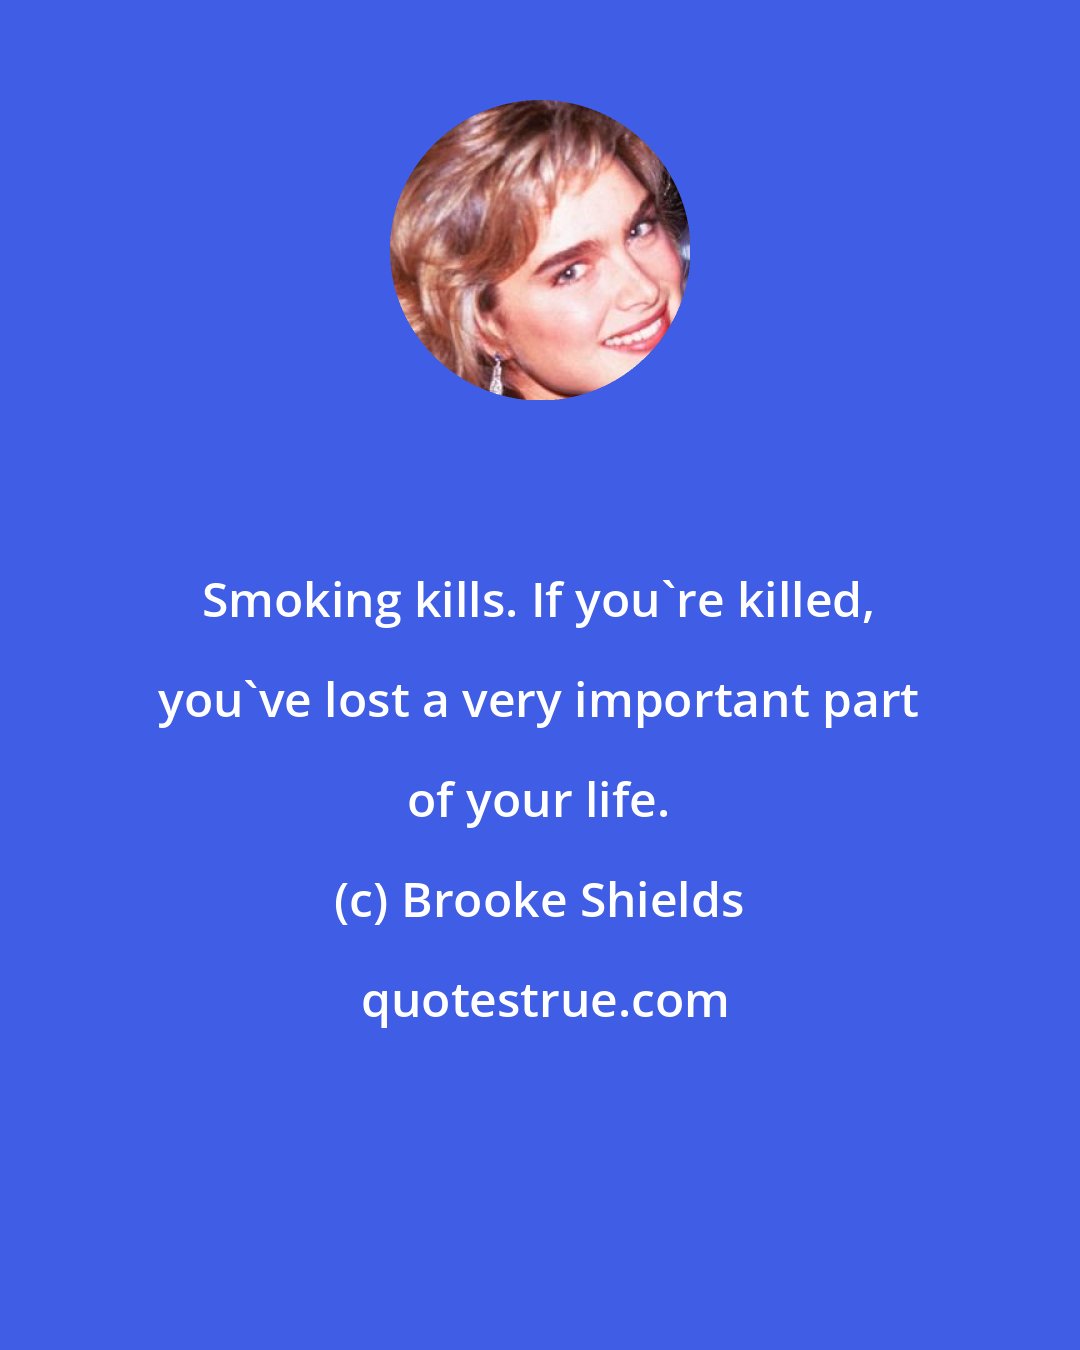 Brooke Shields: Smoking kills. If you're killed, you've lost a very important part of your life.